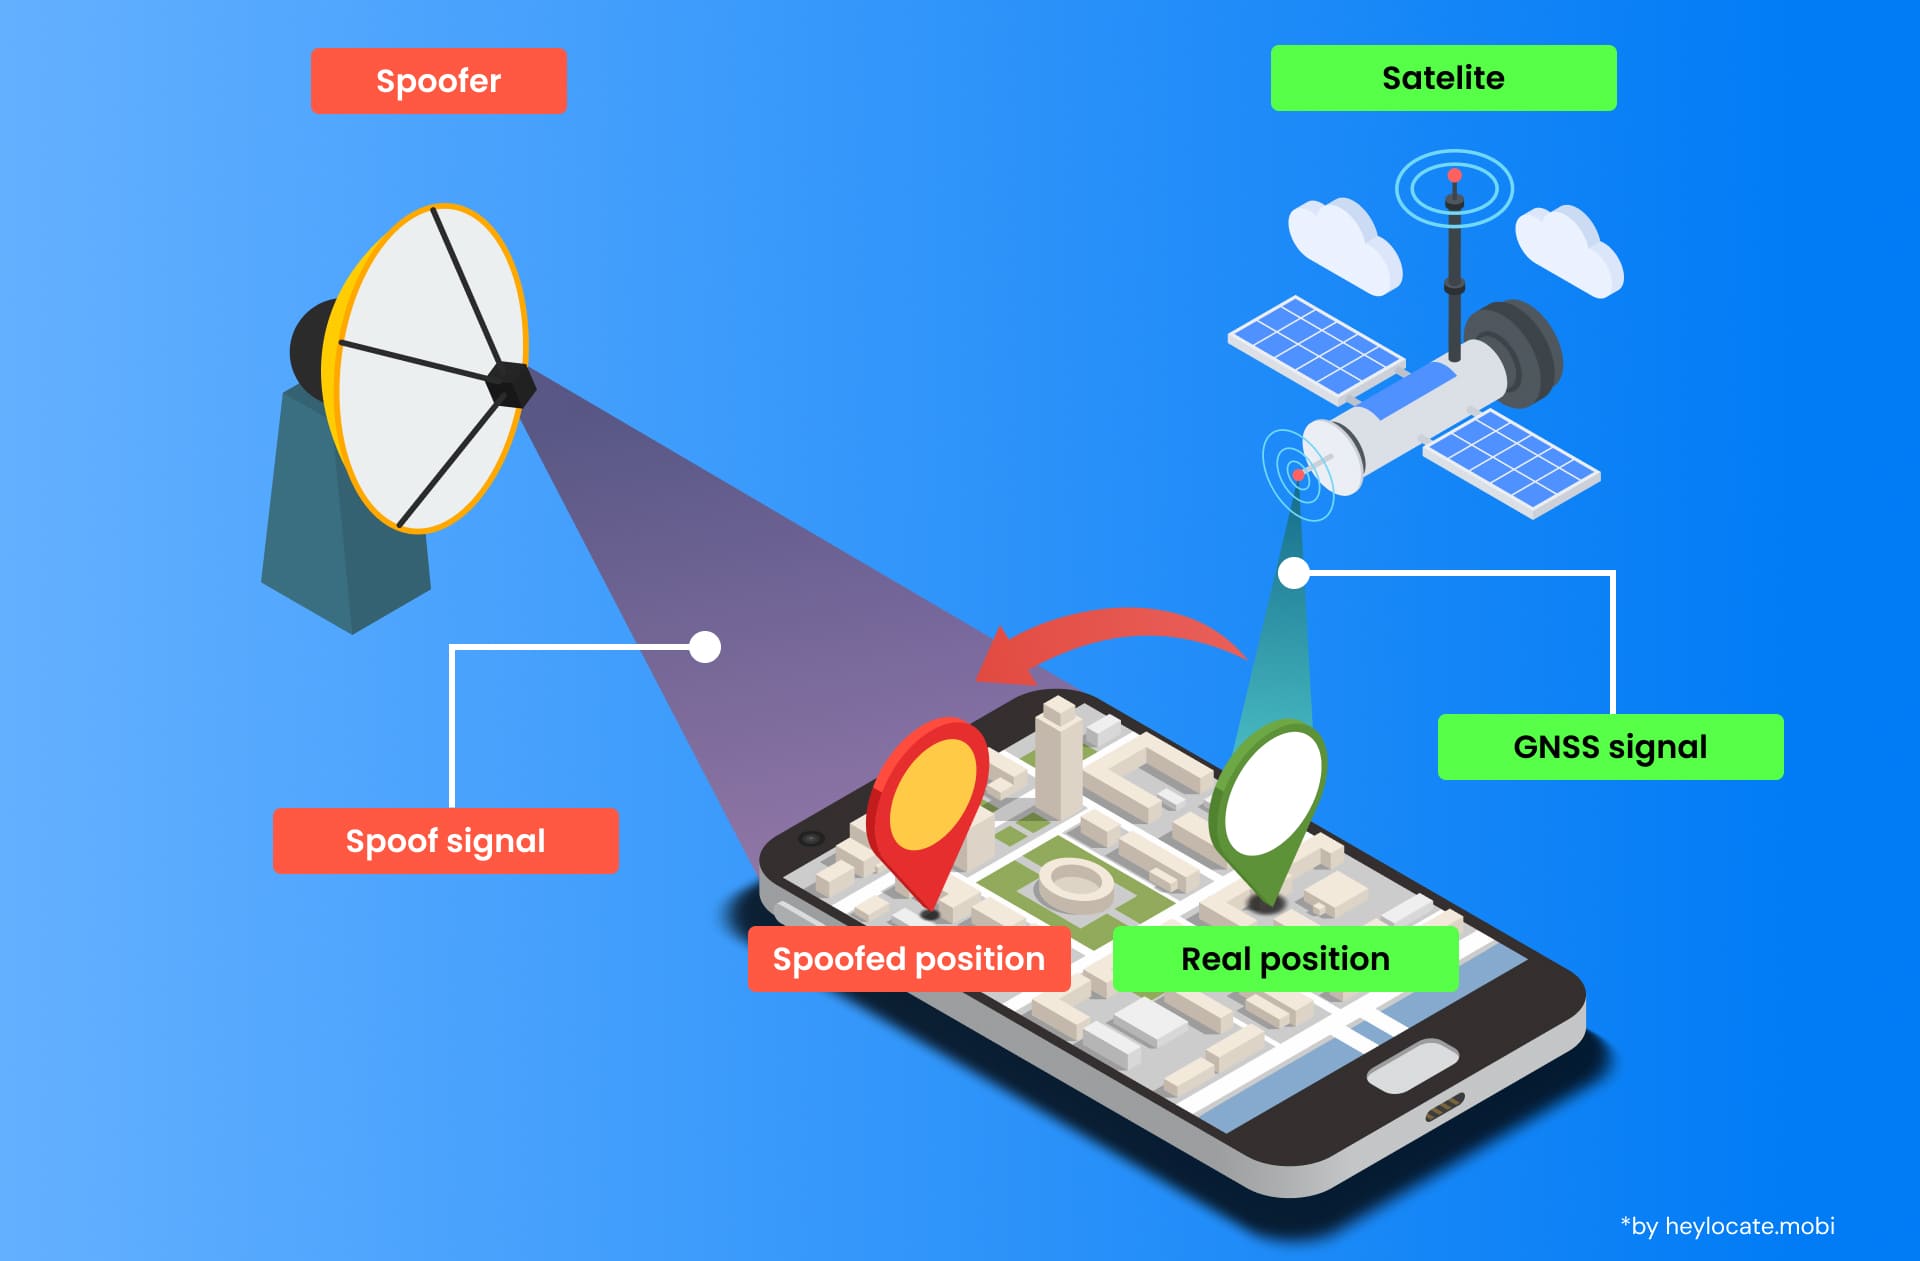 Infographic explaining what is GPS spoofing. Illustration showing a smartphone receiving both a real GNSS signal from a satellite and a spoof signal from a spoofer, displaying that real locations are replaced by fake ones